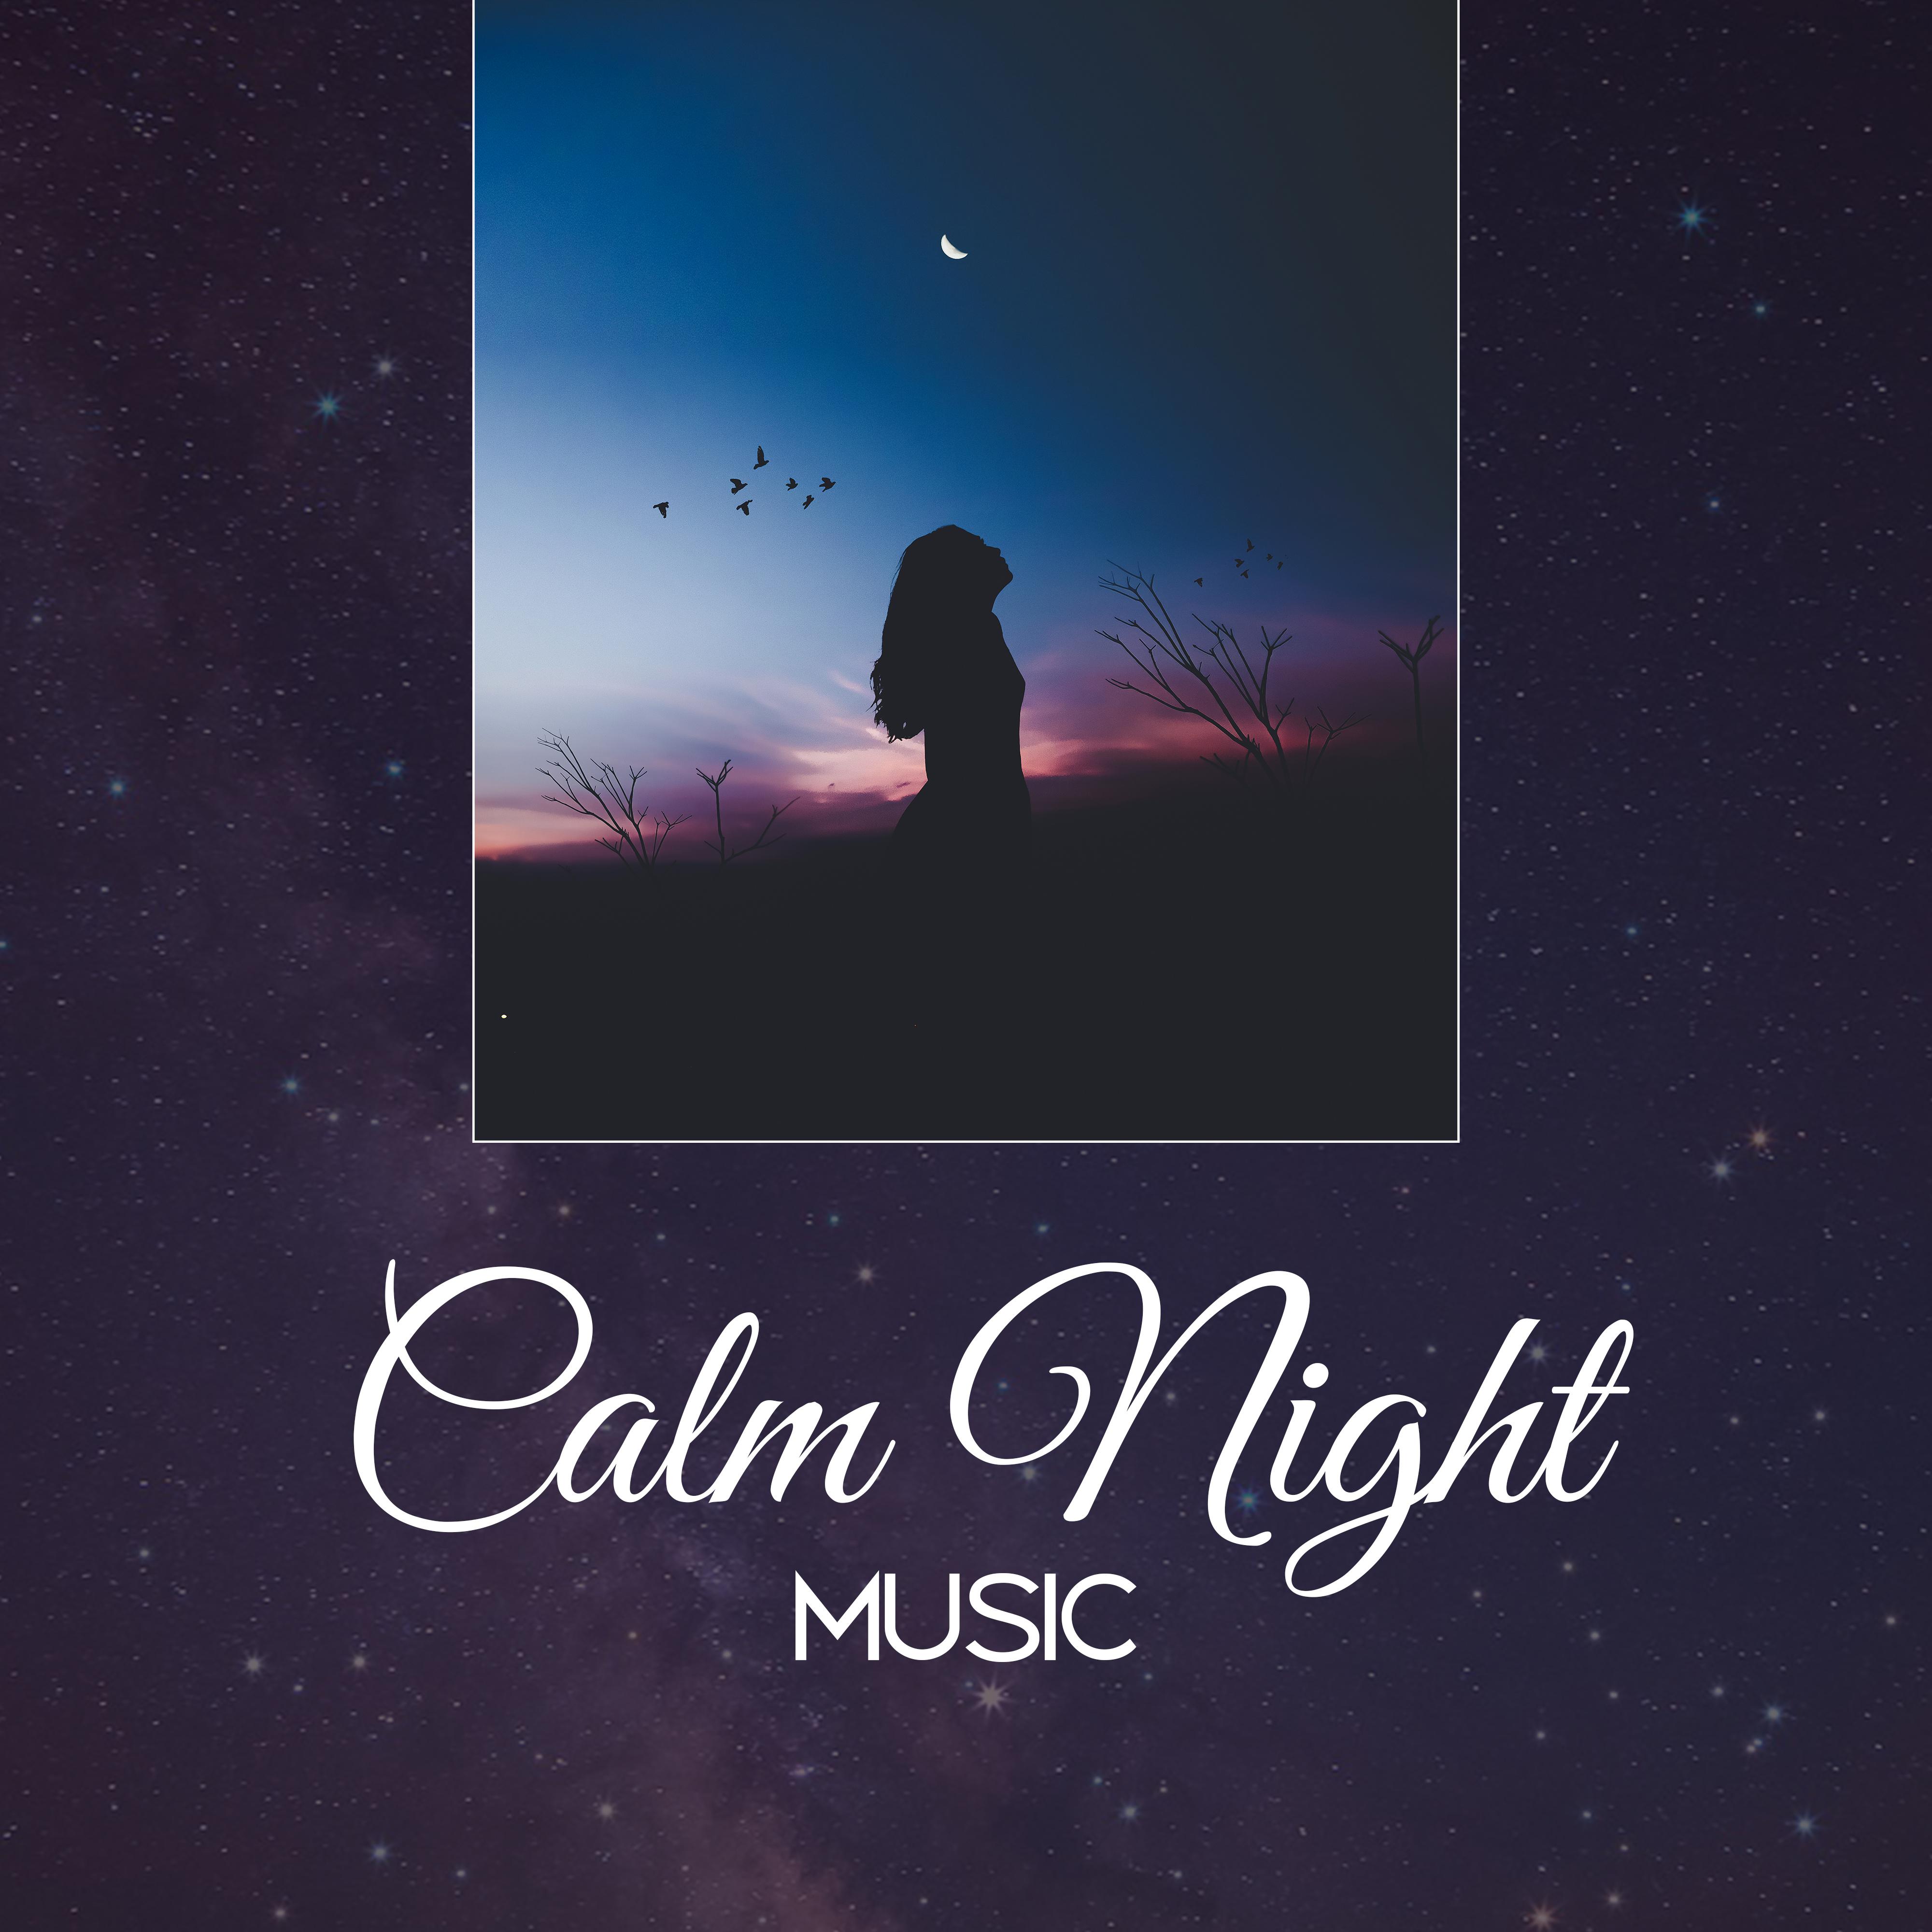 Calm Night Music – Music for Sleep, Relax & Chill, Relaxing Music 2017, Sounds of Nature